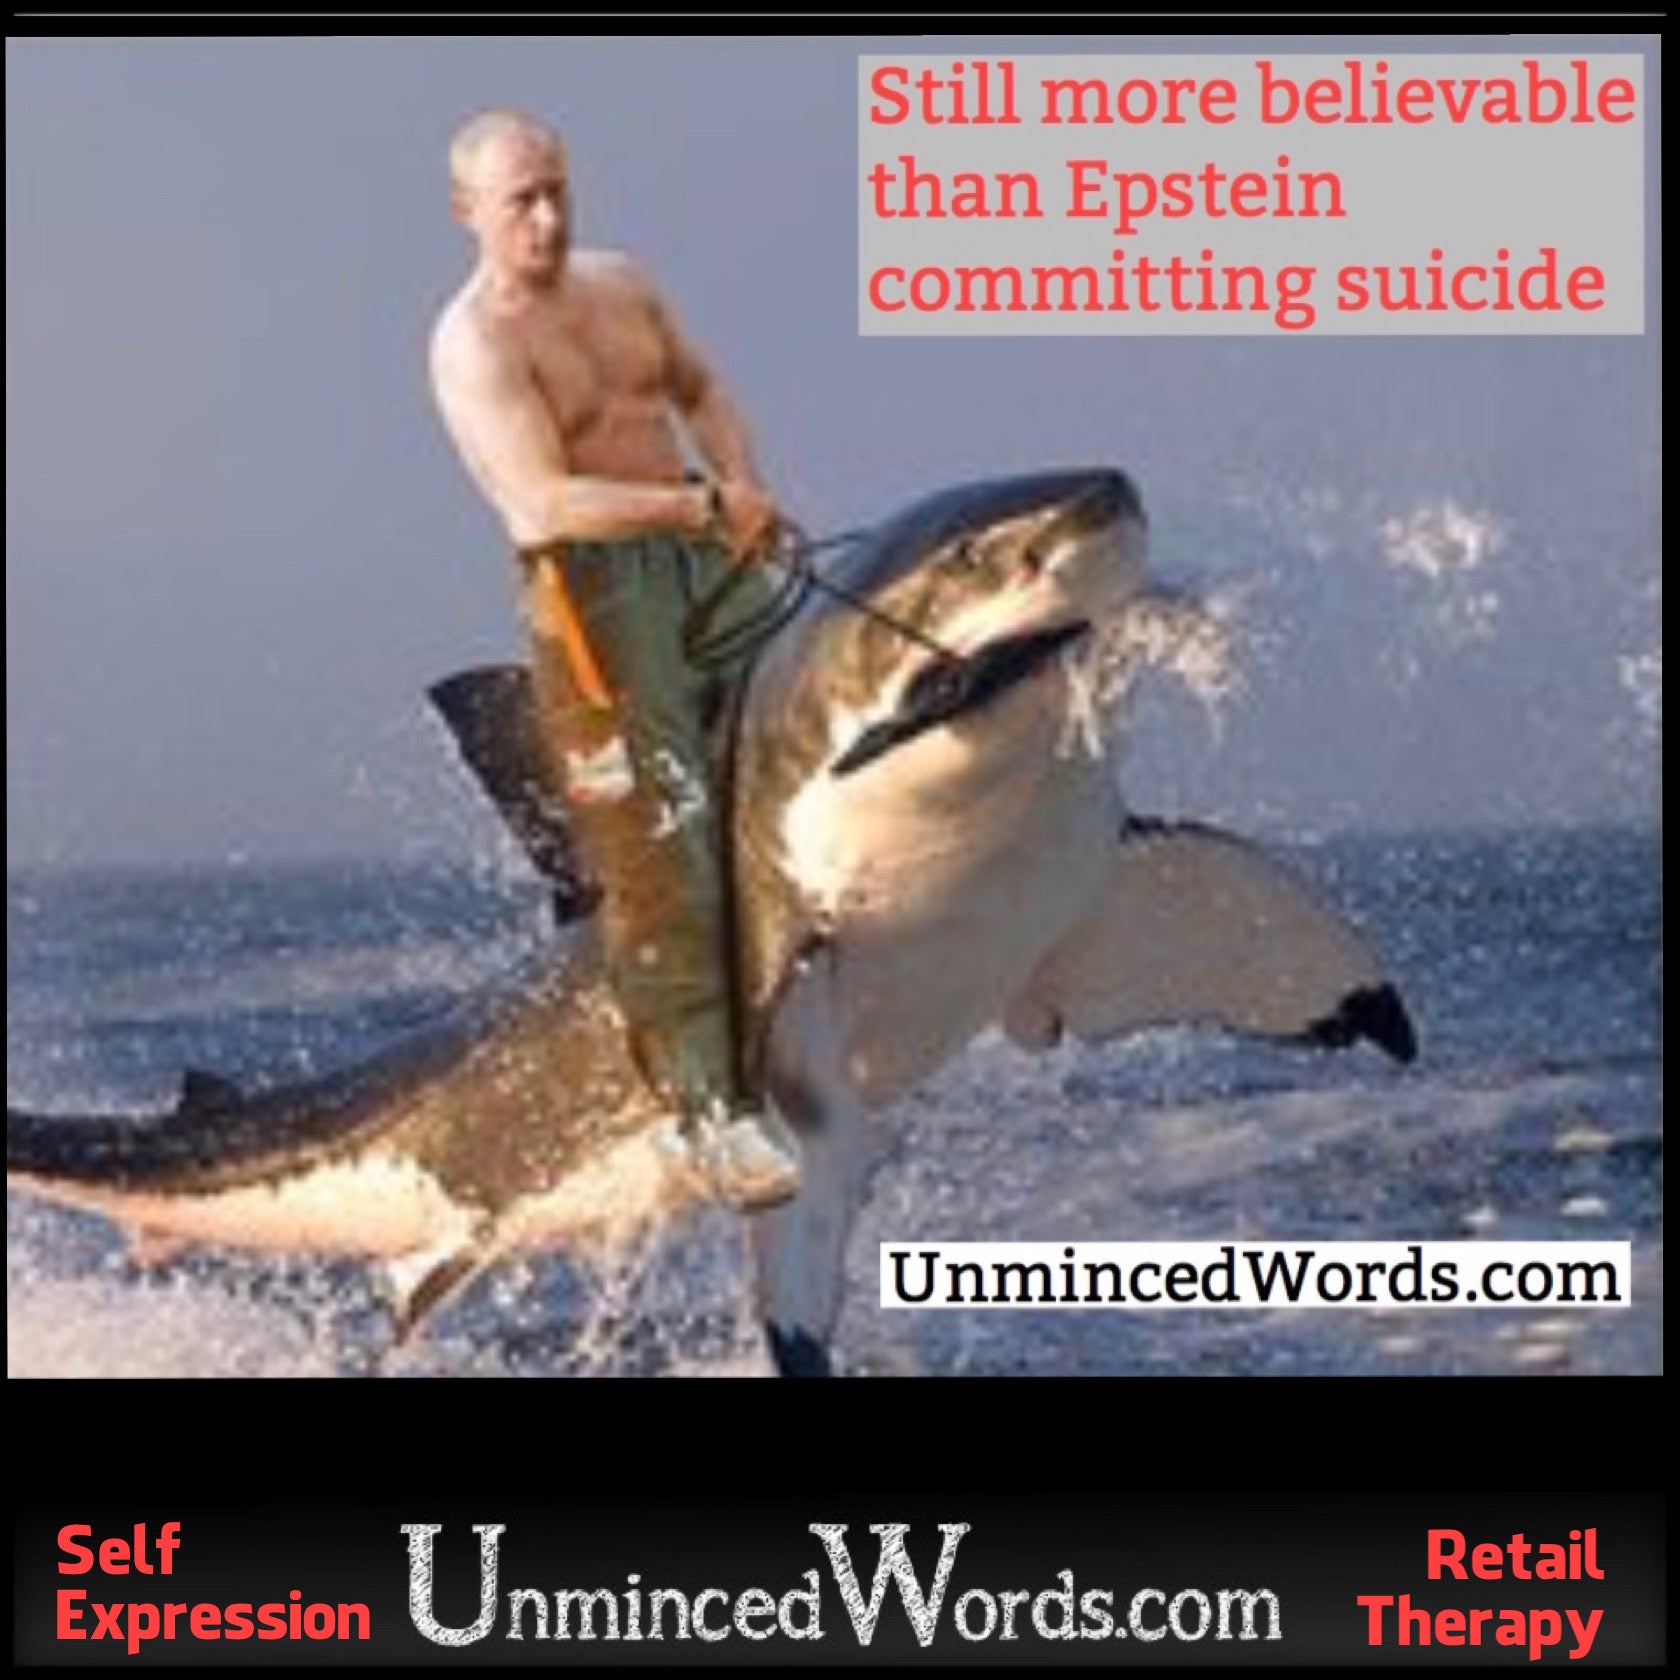 Still more believable than Epstein committing suicide